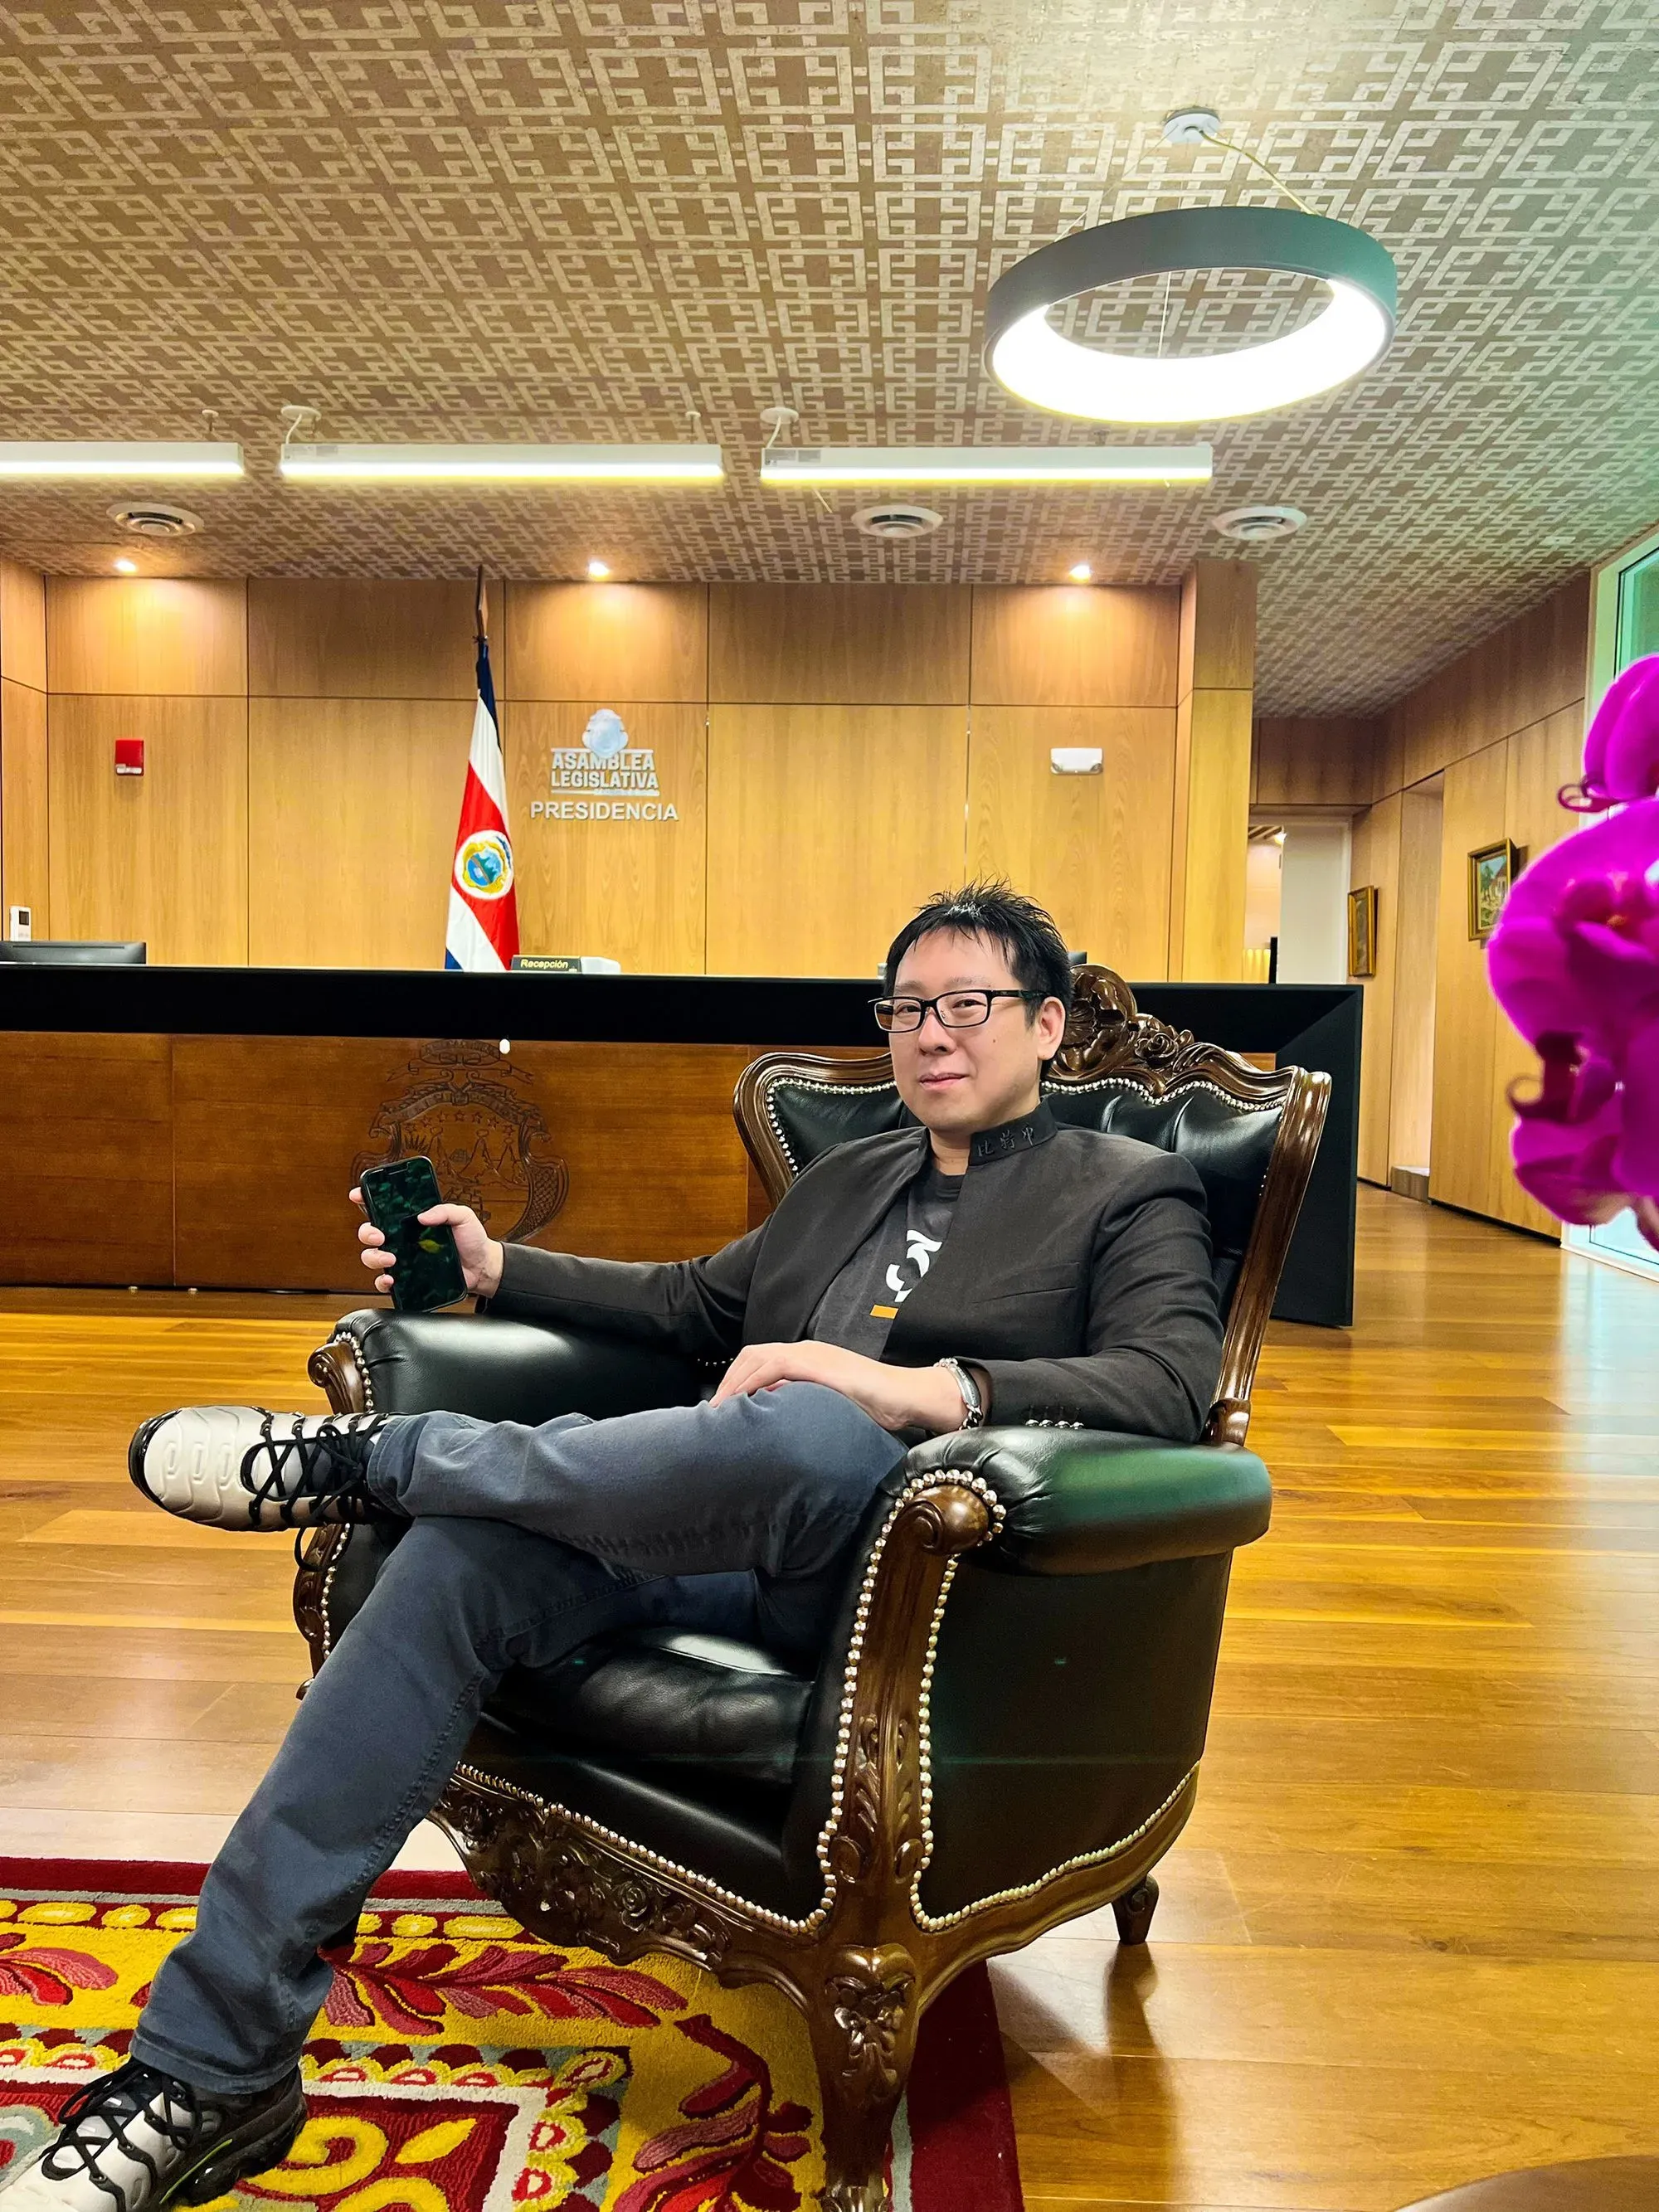 Samson Mow at the office of the President of the Legislative Assembly of Costa Rica